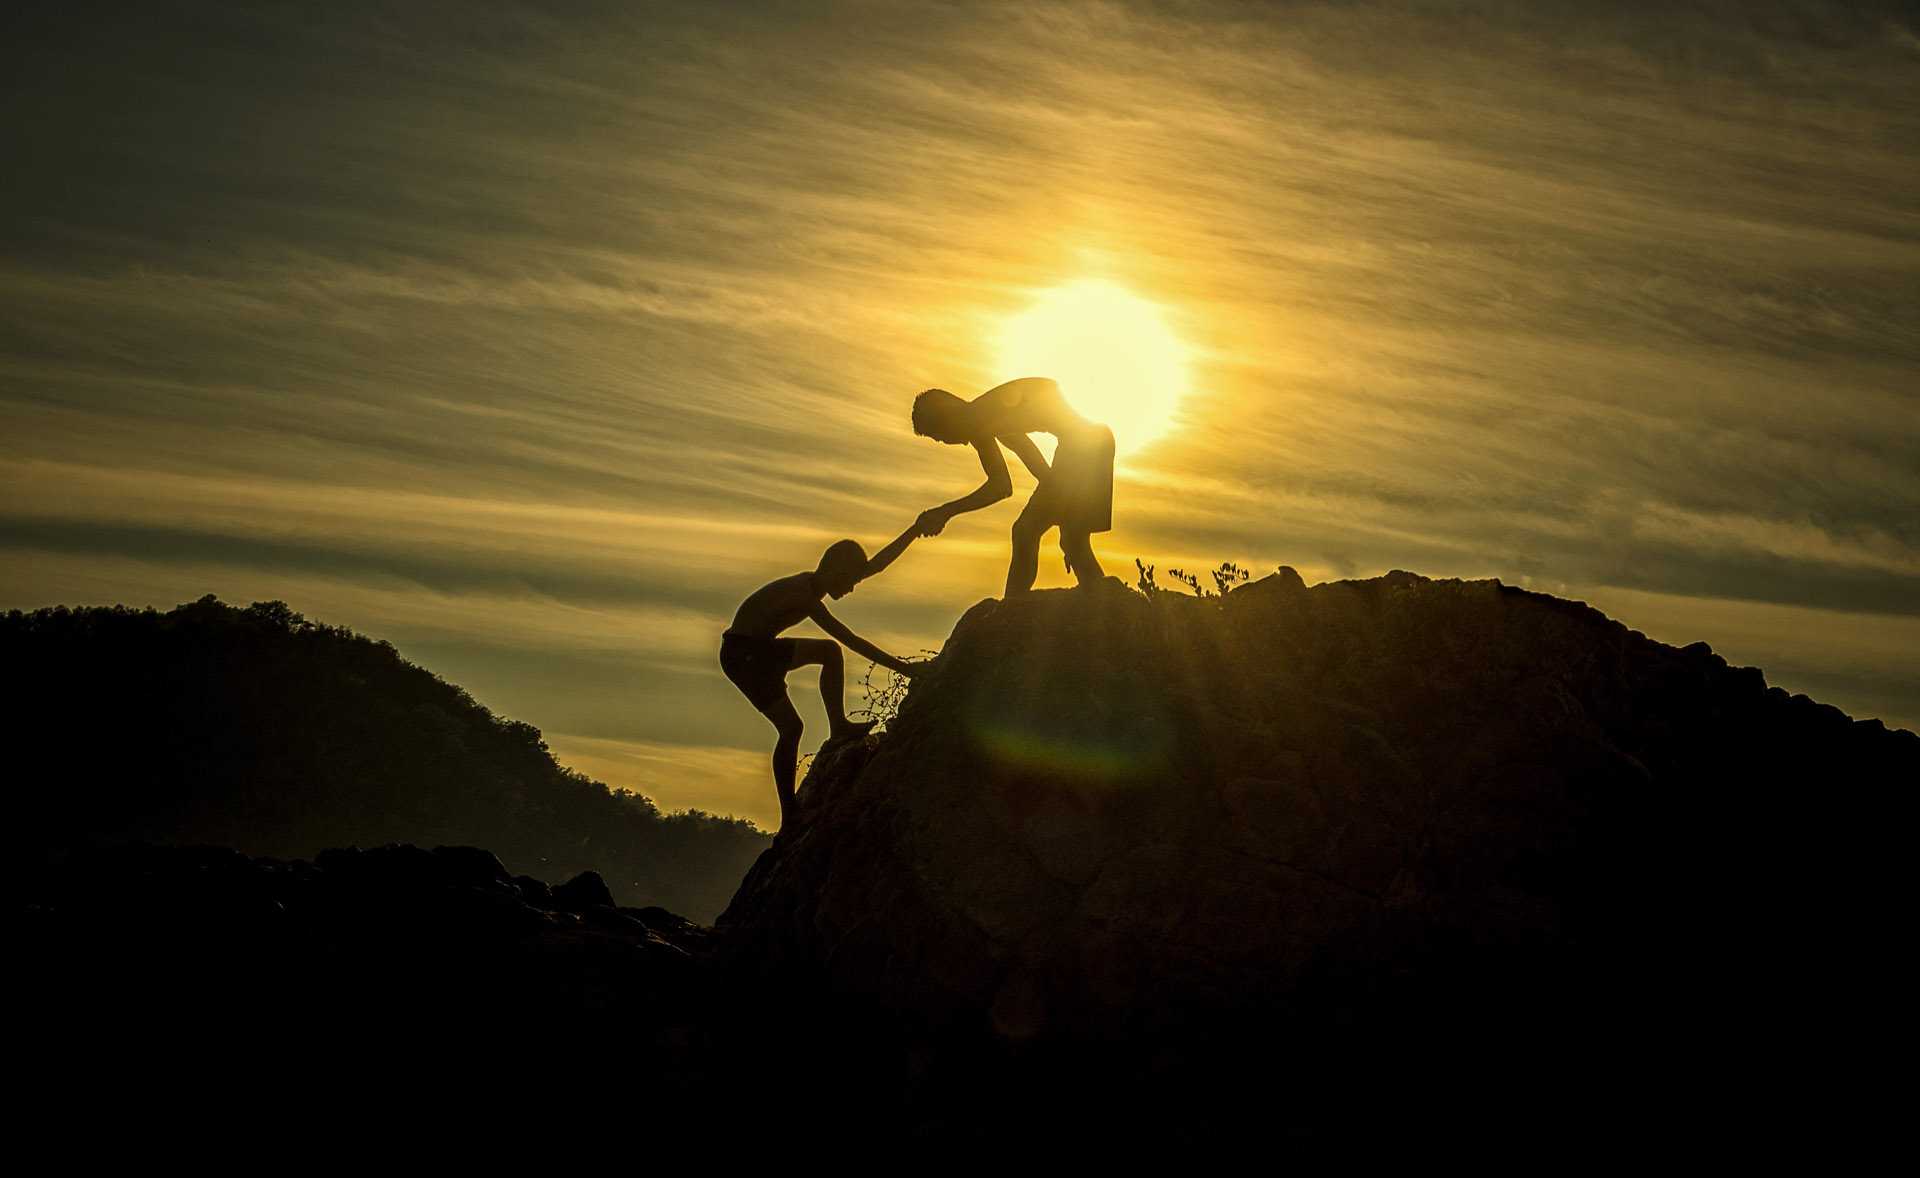 Sunlight over a mountain with one person helping another up the final step